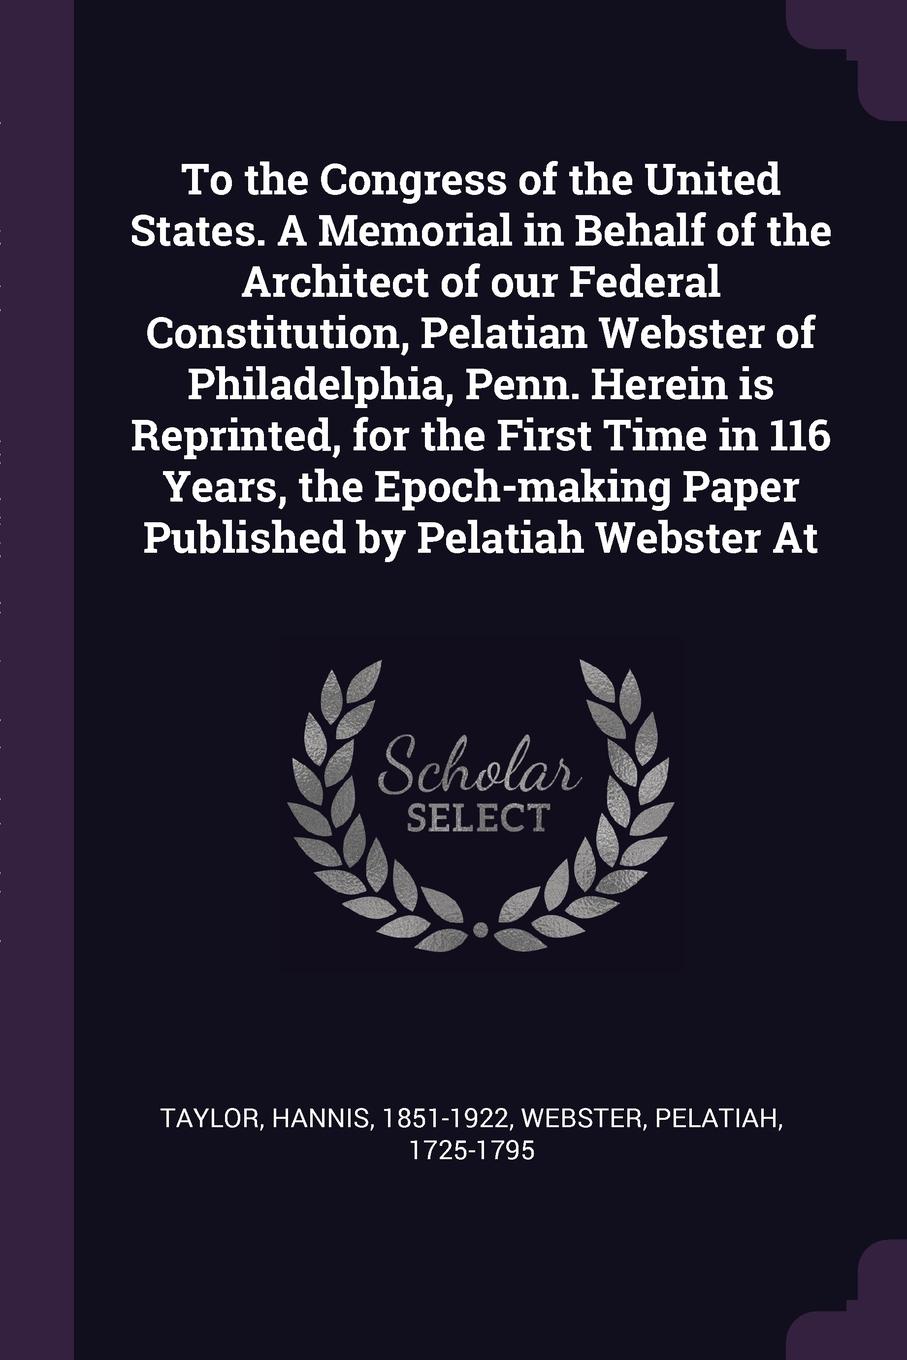 To the Congress of the United States. A Memorial in Behalf of the Architect of our Federal Constitution, Pelatian Webster of Philadelphia, Penn. Herein is Reprinted, for the First Time in 116 Years, the Epoch-making Paper Published by Pelatiah Web...